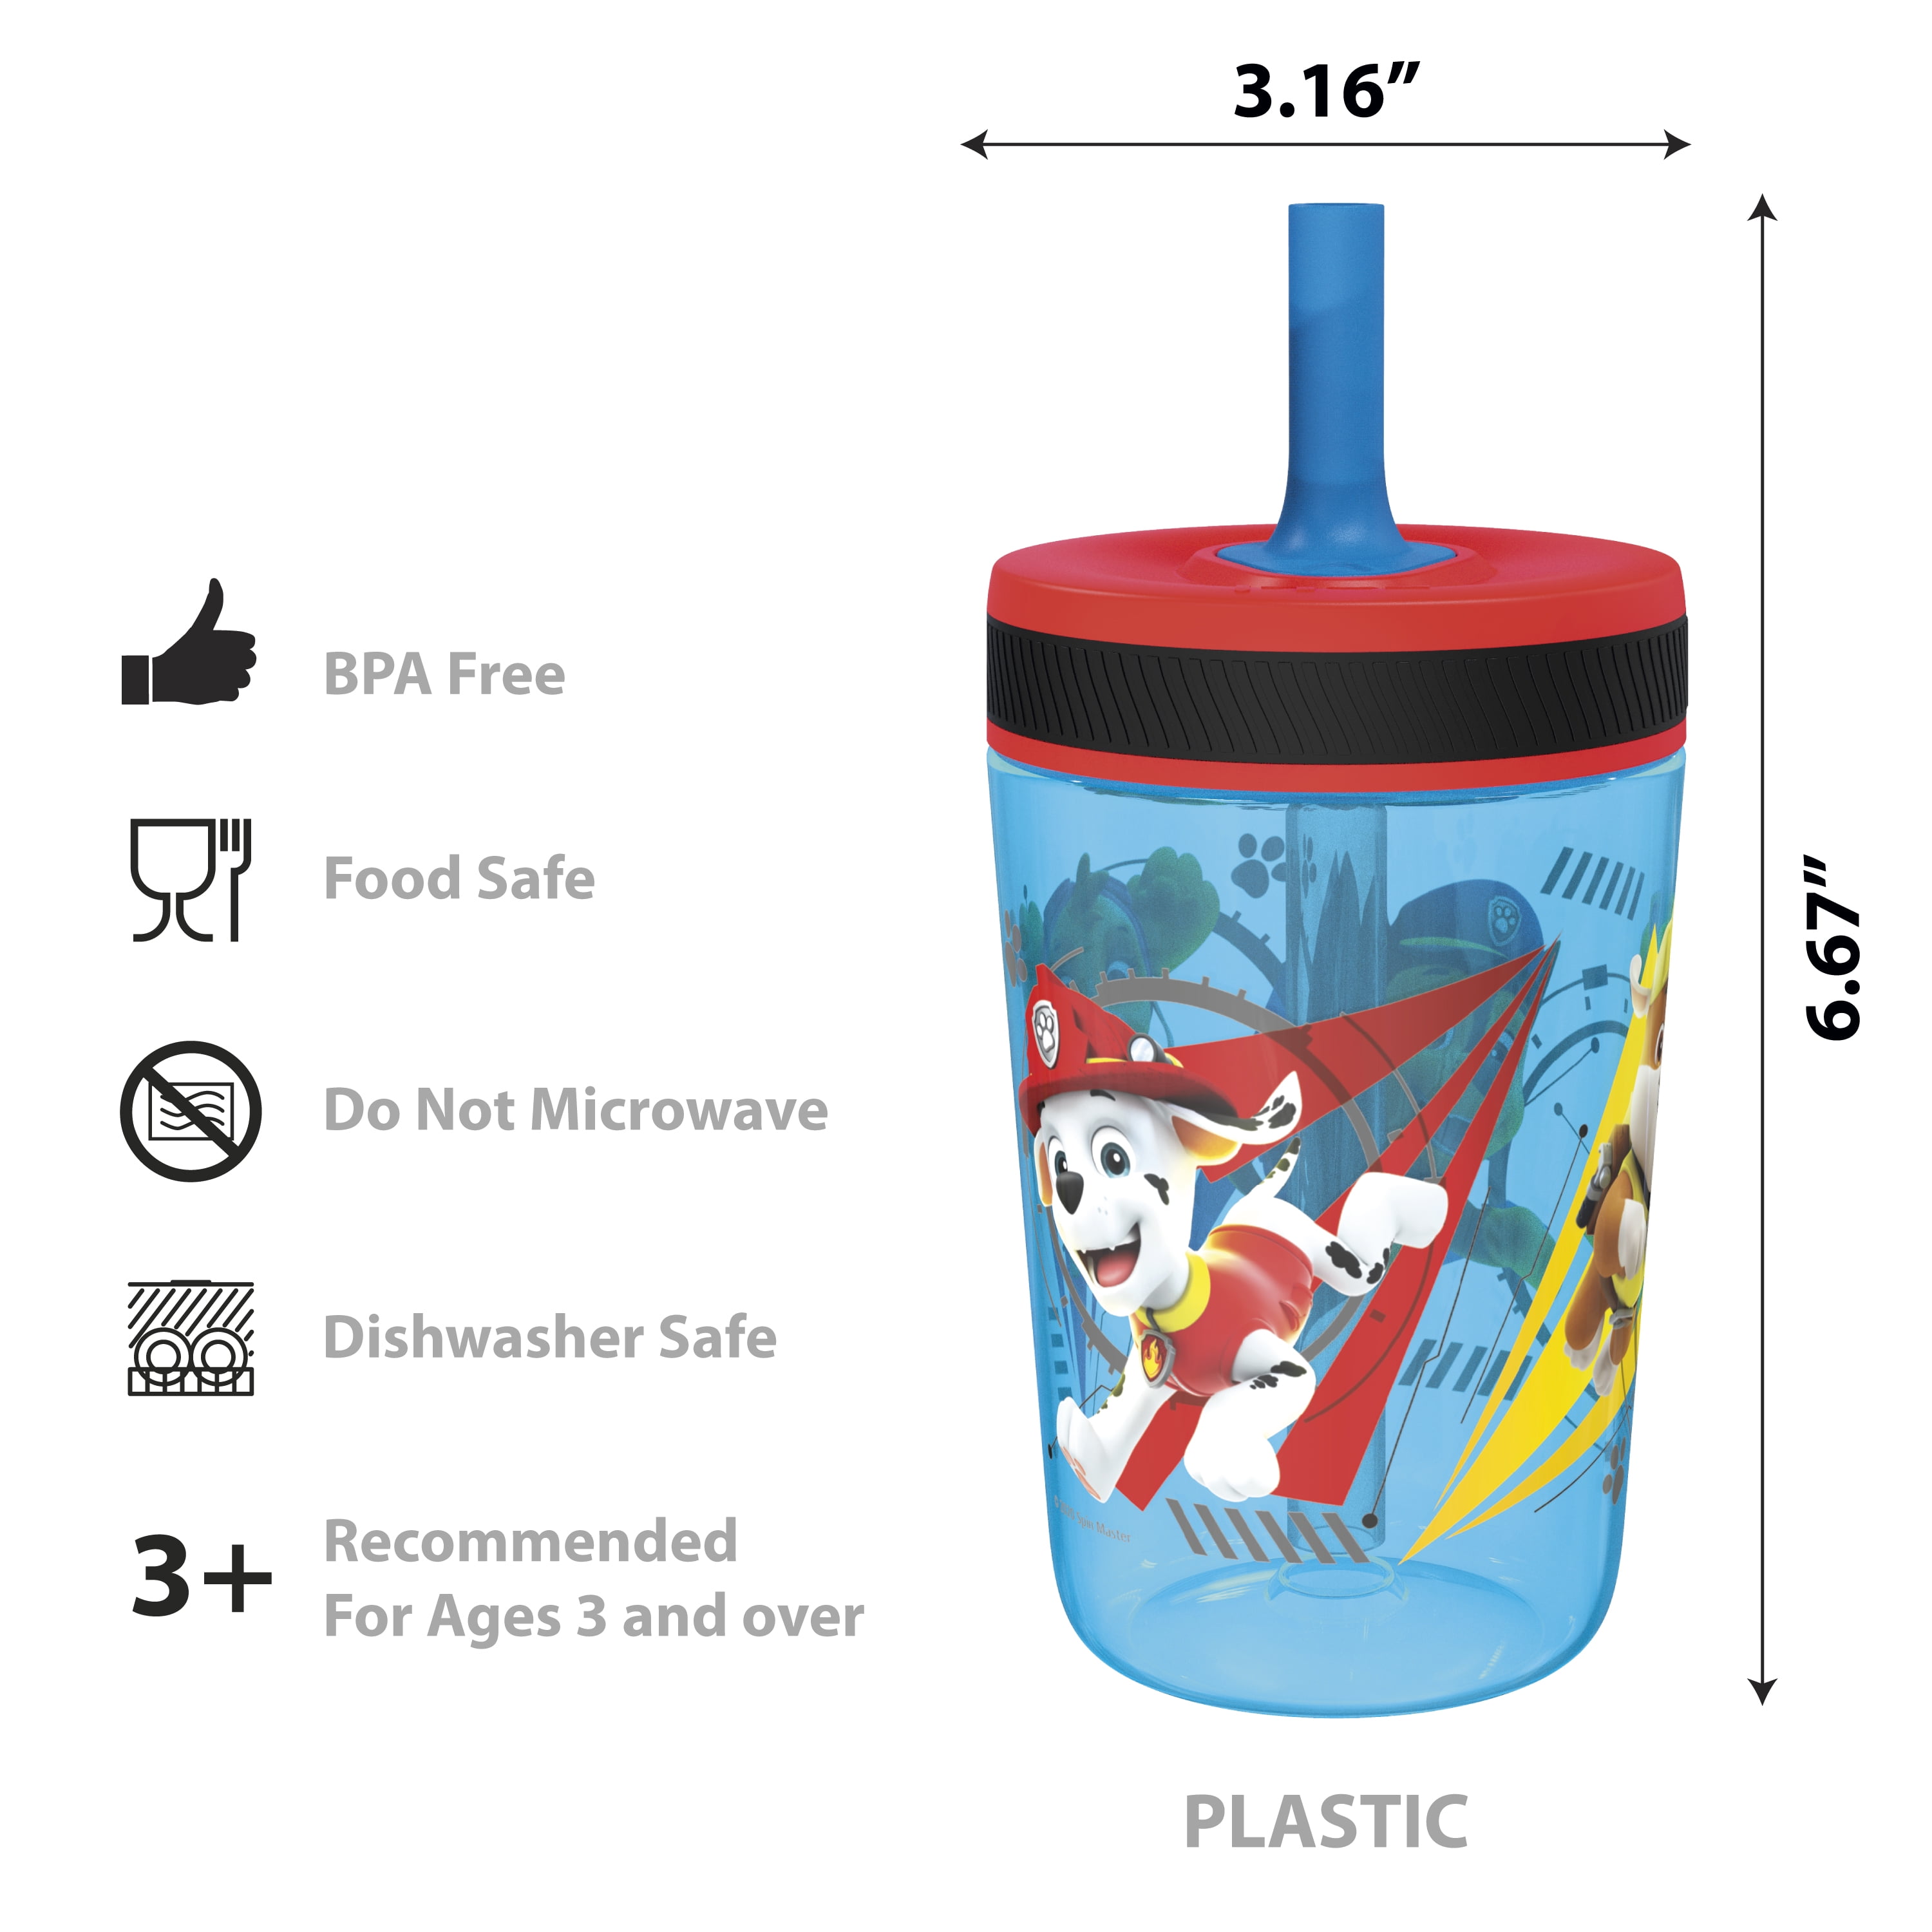 Zak Designs Kelso Tumbler 15 oz Set (Paw Patrol - Chase & Marshall 2pc Set)  Toddlers Cups Non-BPA Leak-Proof Screw-On Lid with Straw Made of Durable  Plastic and Silicone, Perfect Baby Cup